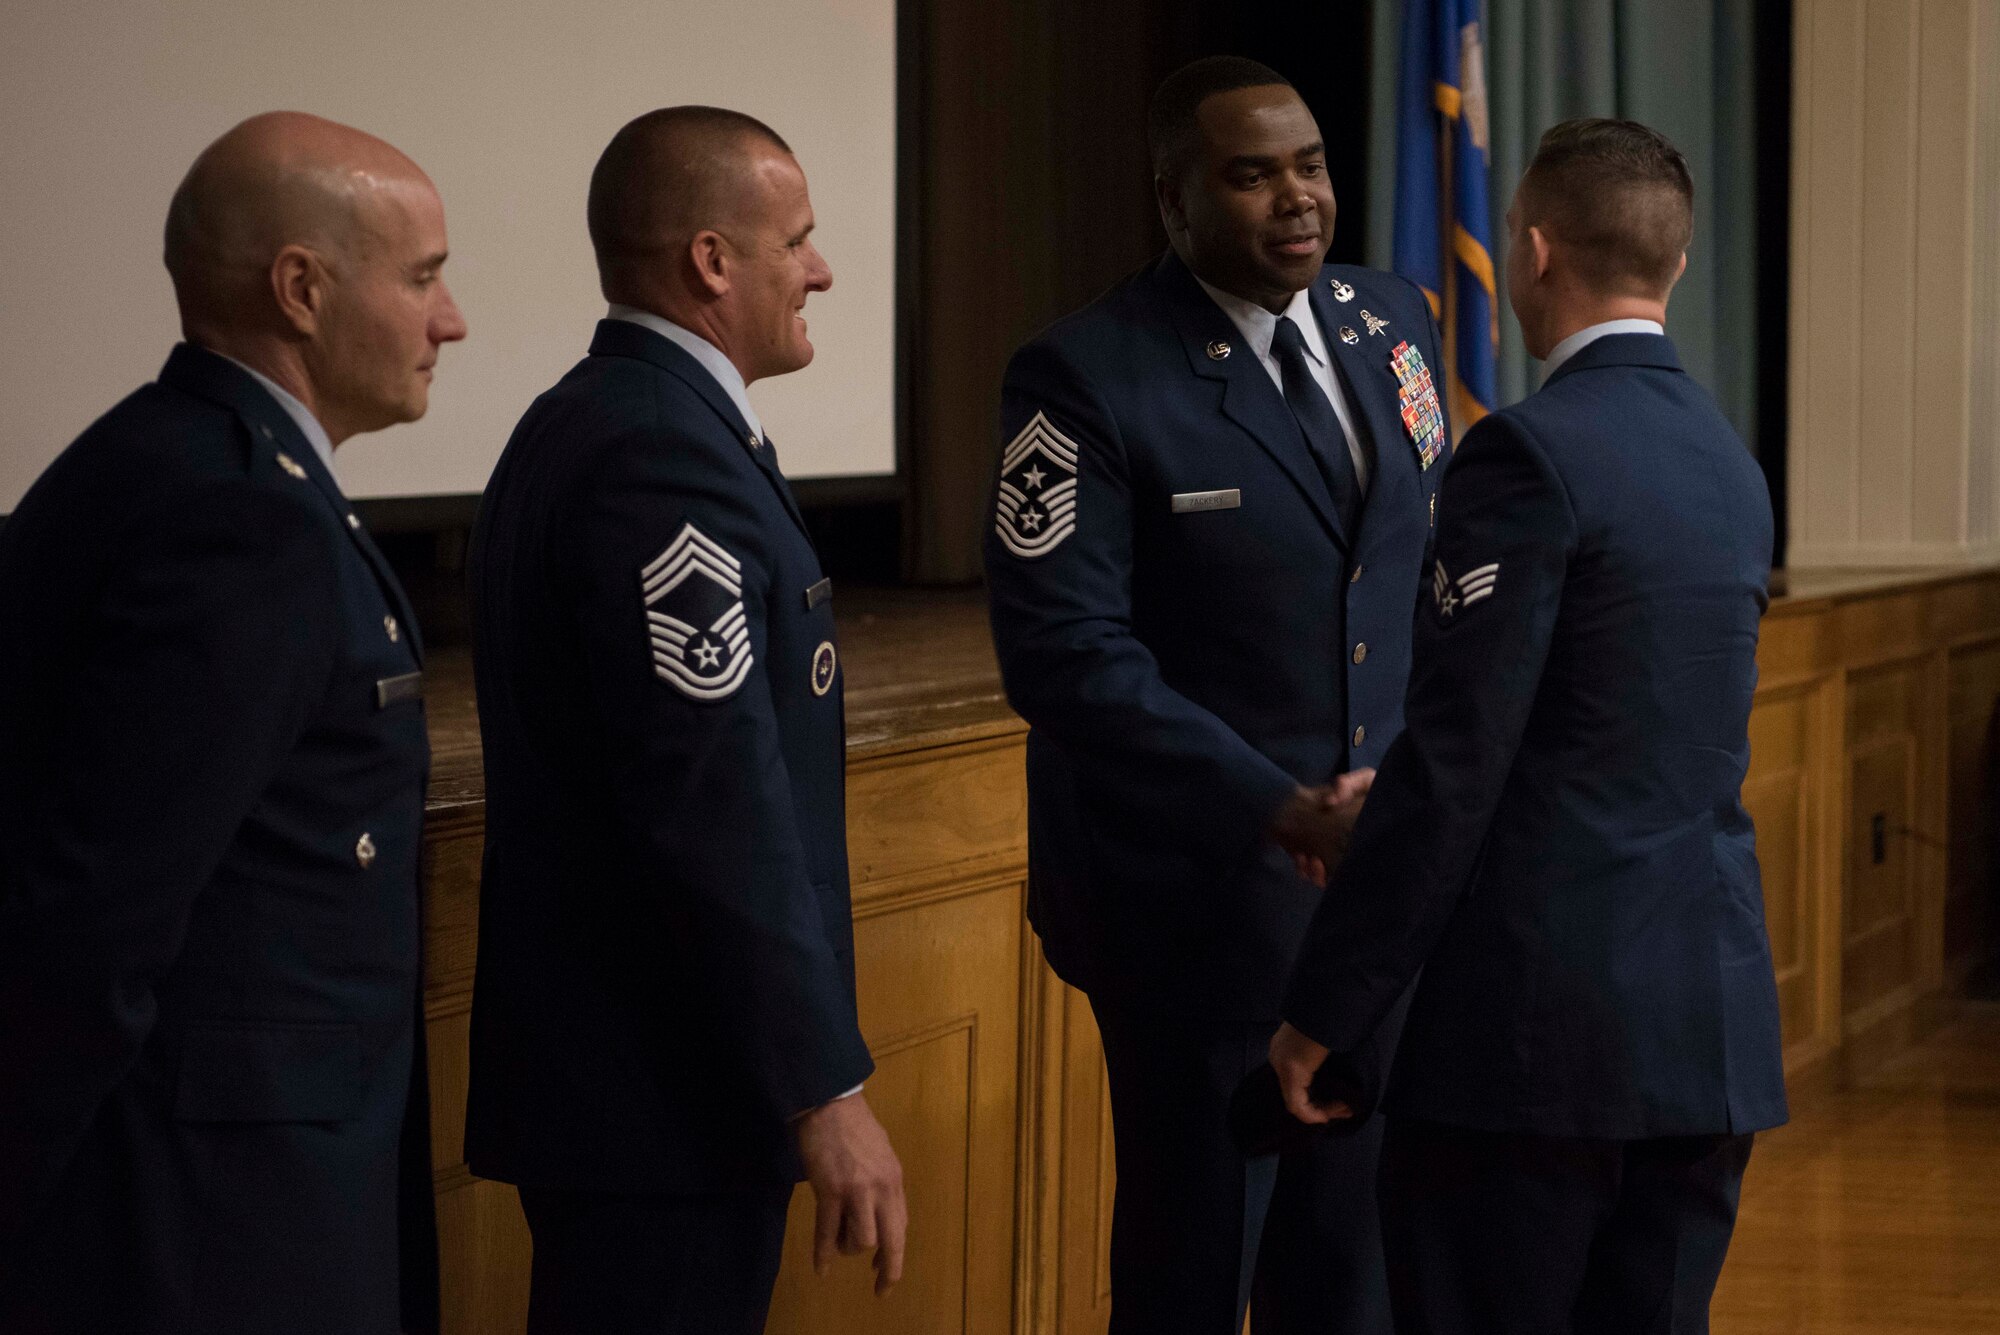 The graduation official party, including Chief Master Sgt. Robert L. Zackery III, 47th Flying Training Wing command chief master sergeant, congratulate a Tactical Air Control Party (TACP) Apprentice Course graduate at Joint Base San Antonio-Lackland, Texas, Dec. 13, 2019. Graduates were finally able to receive their black berets and blouse their dress blues after crossing the stage. (U.S. Air Force photo by Senior Airman Marco A. Gomez)